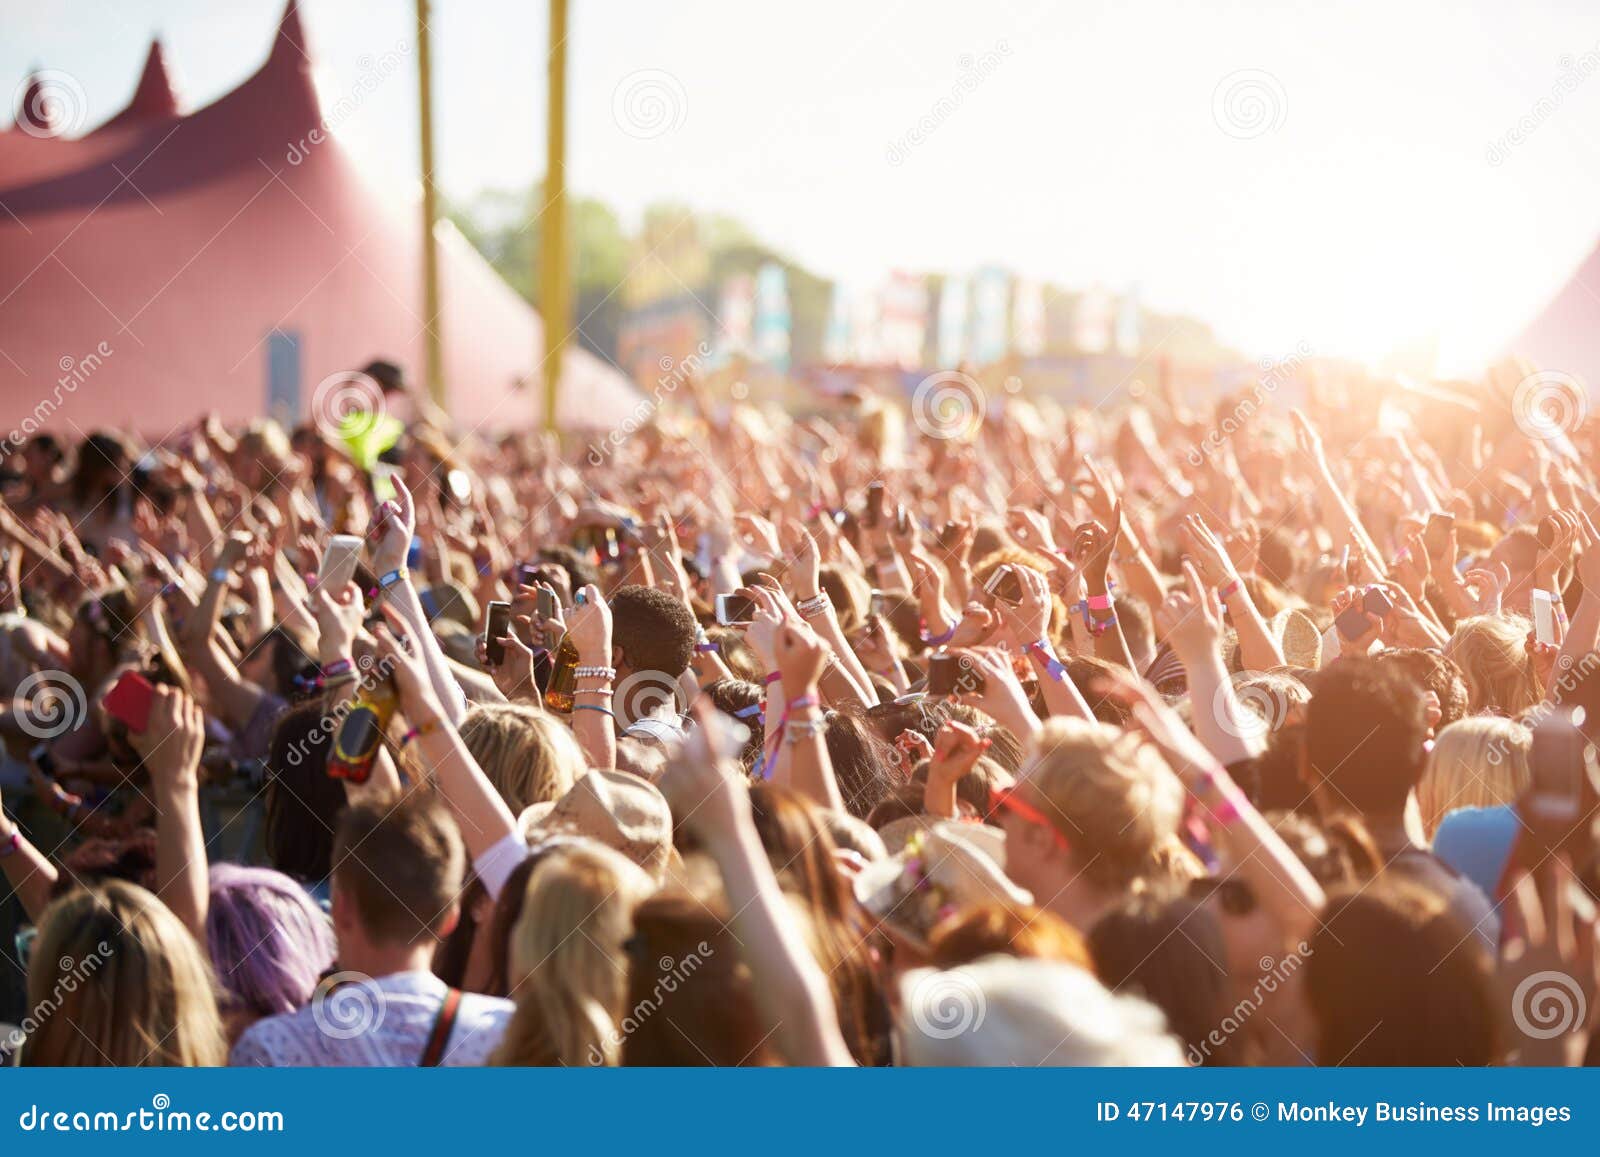 Audience at Outdoor Music Festival Editorial Photo - Image of culture ...